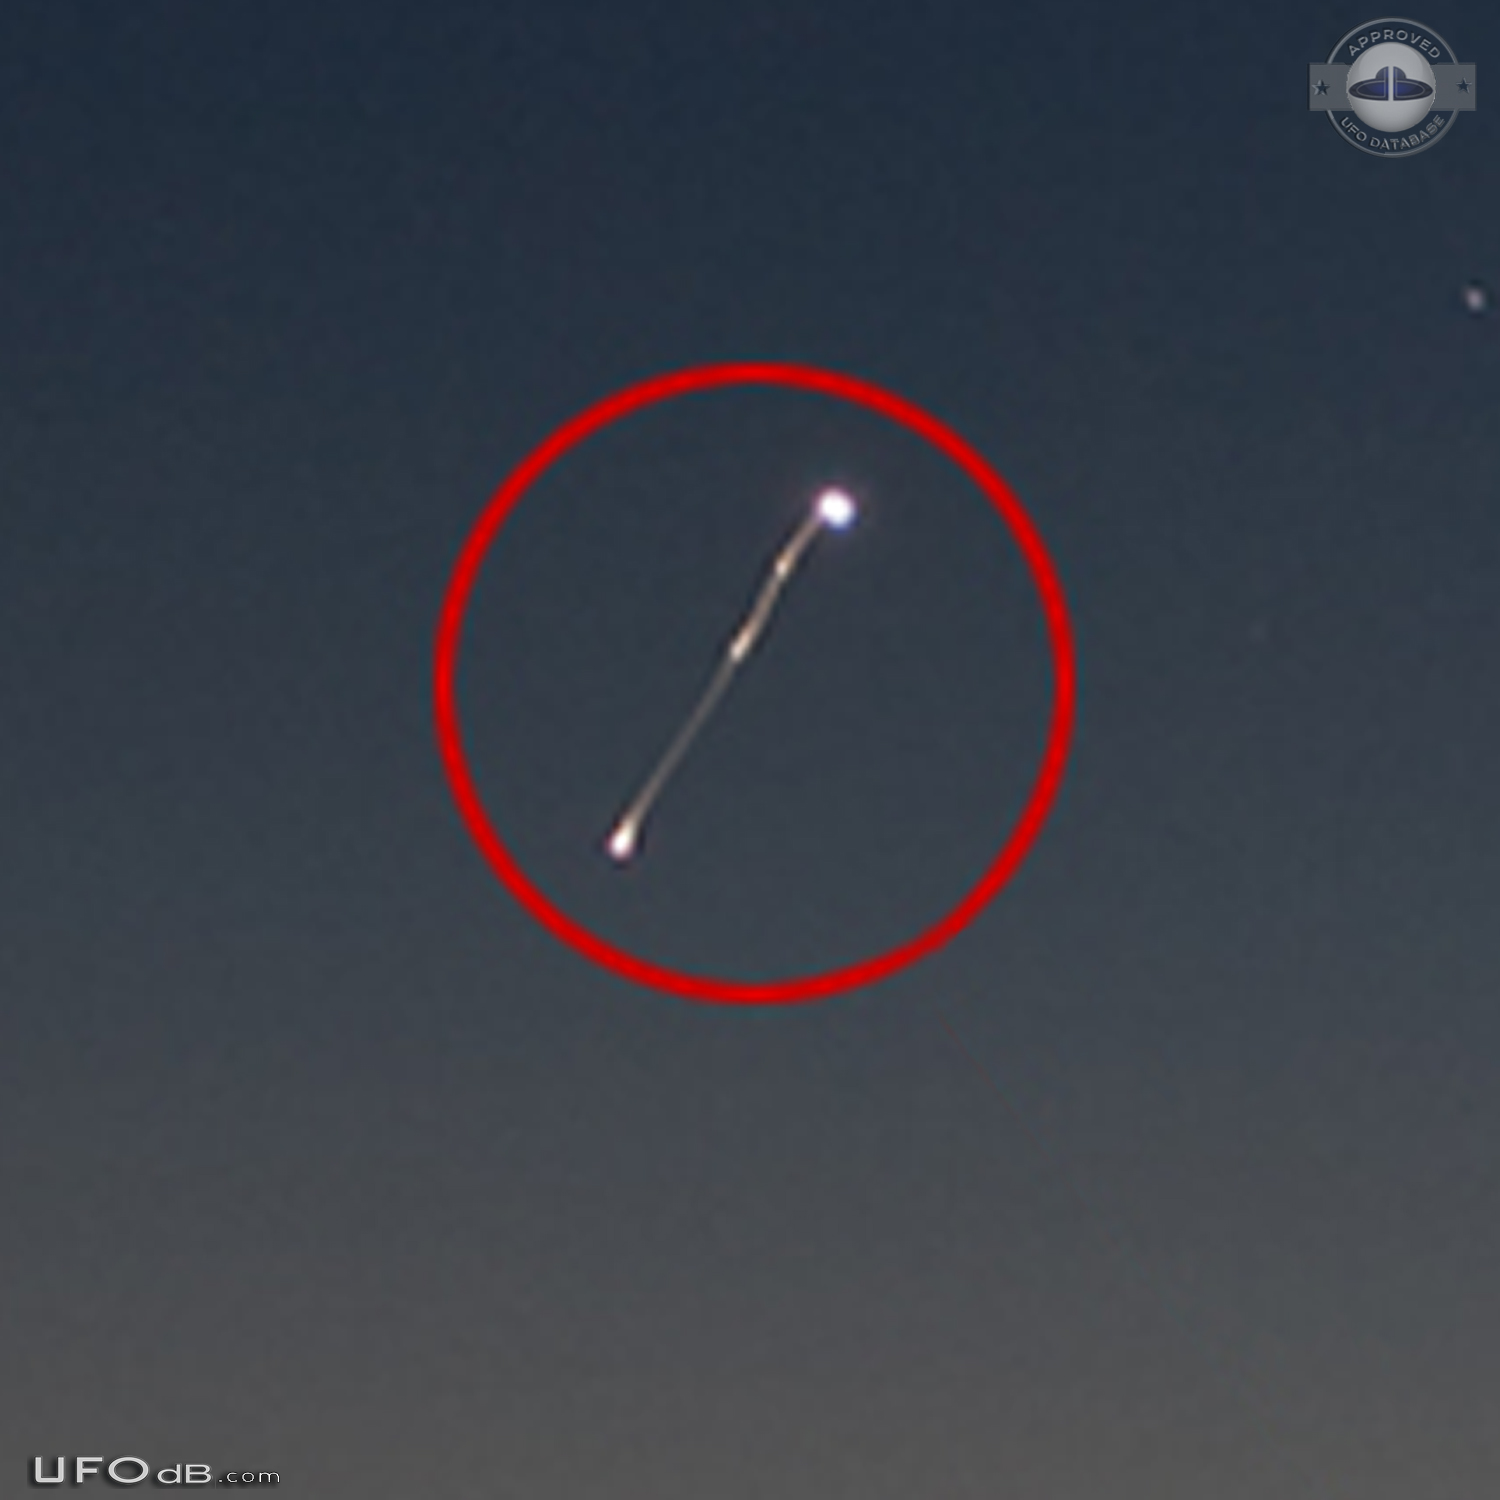 Mysterious Lights UFOS Observed Near Apsley Ontario Canada 2015 UFO Picture #721-3